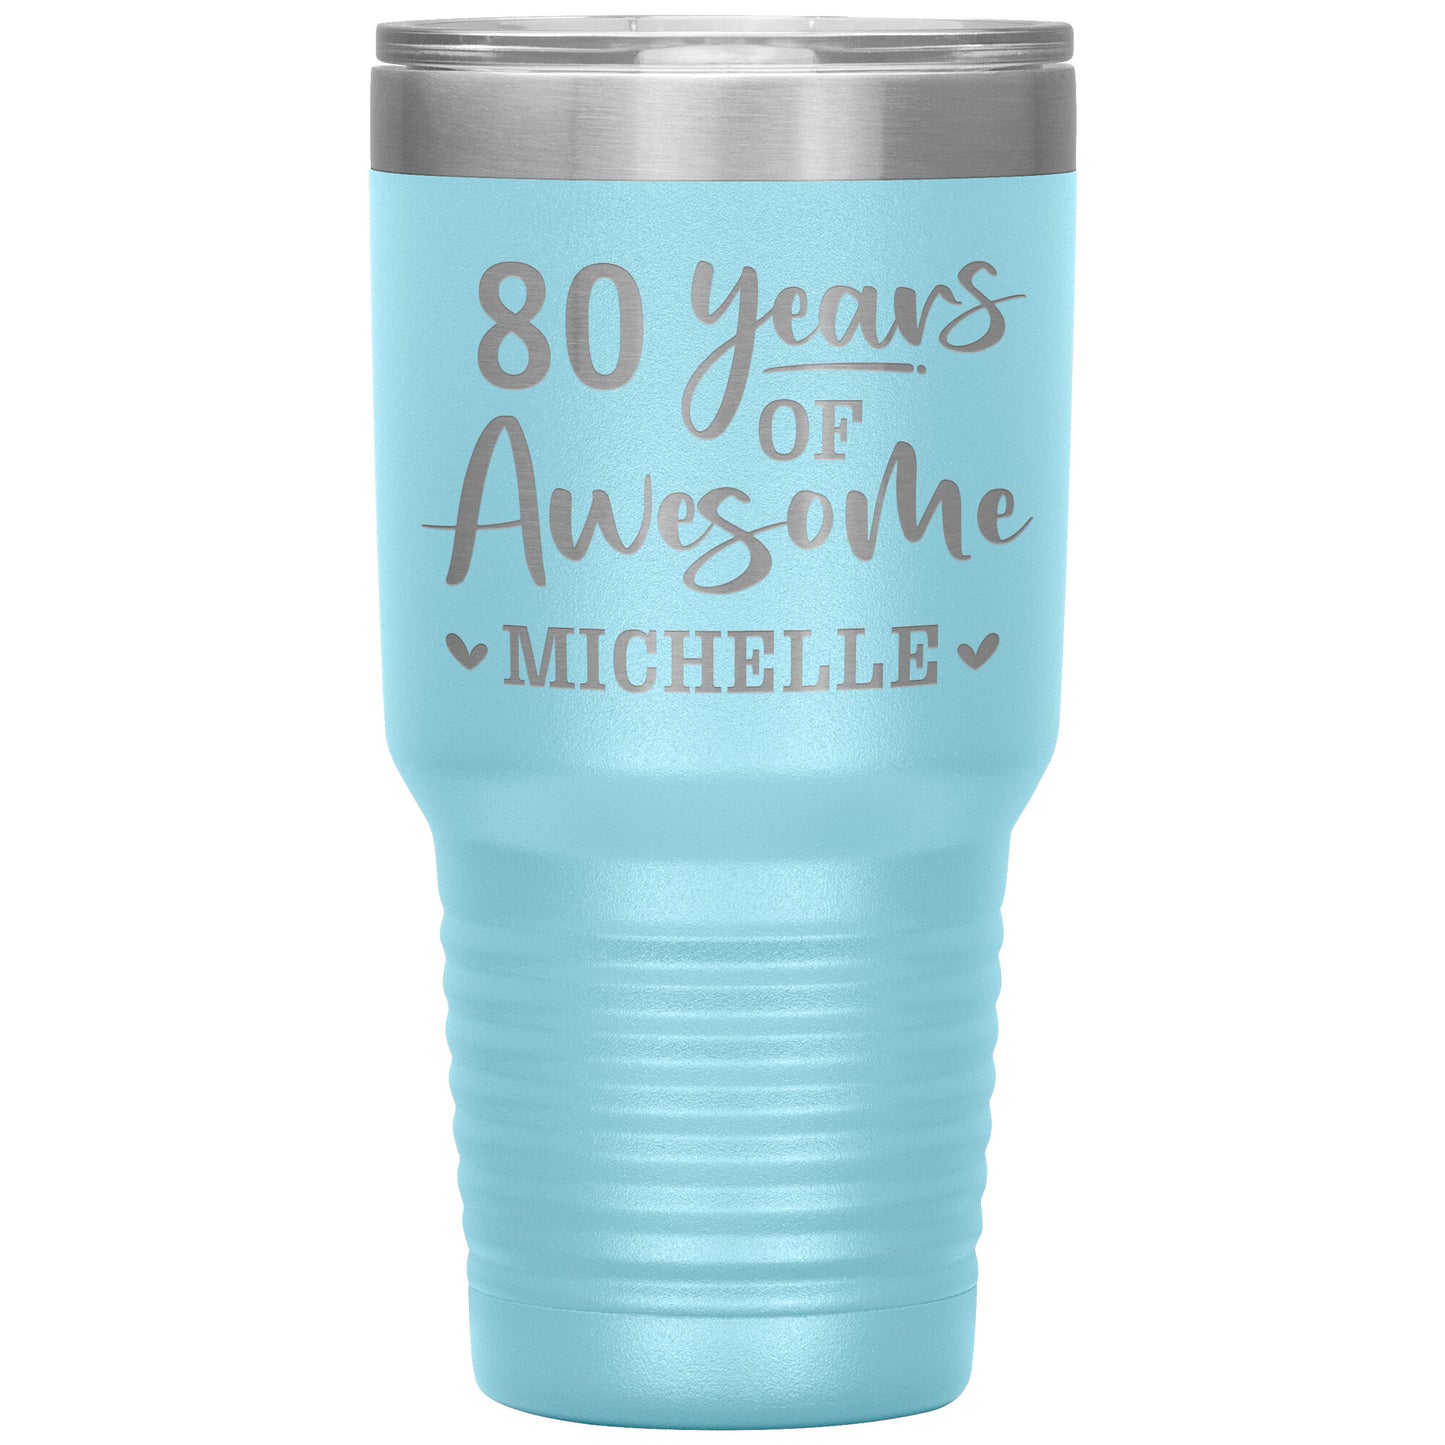 80 Years of Awesome Tumbler